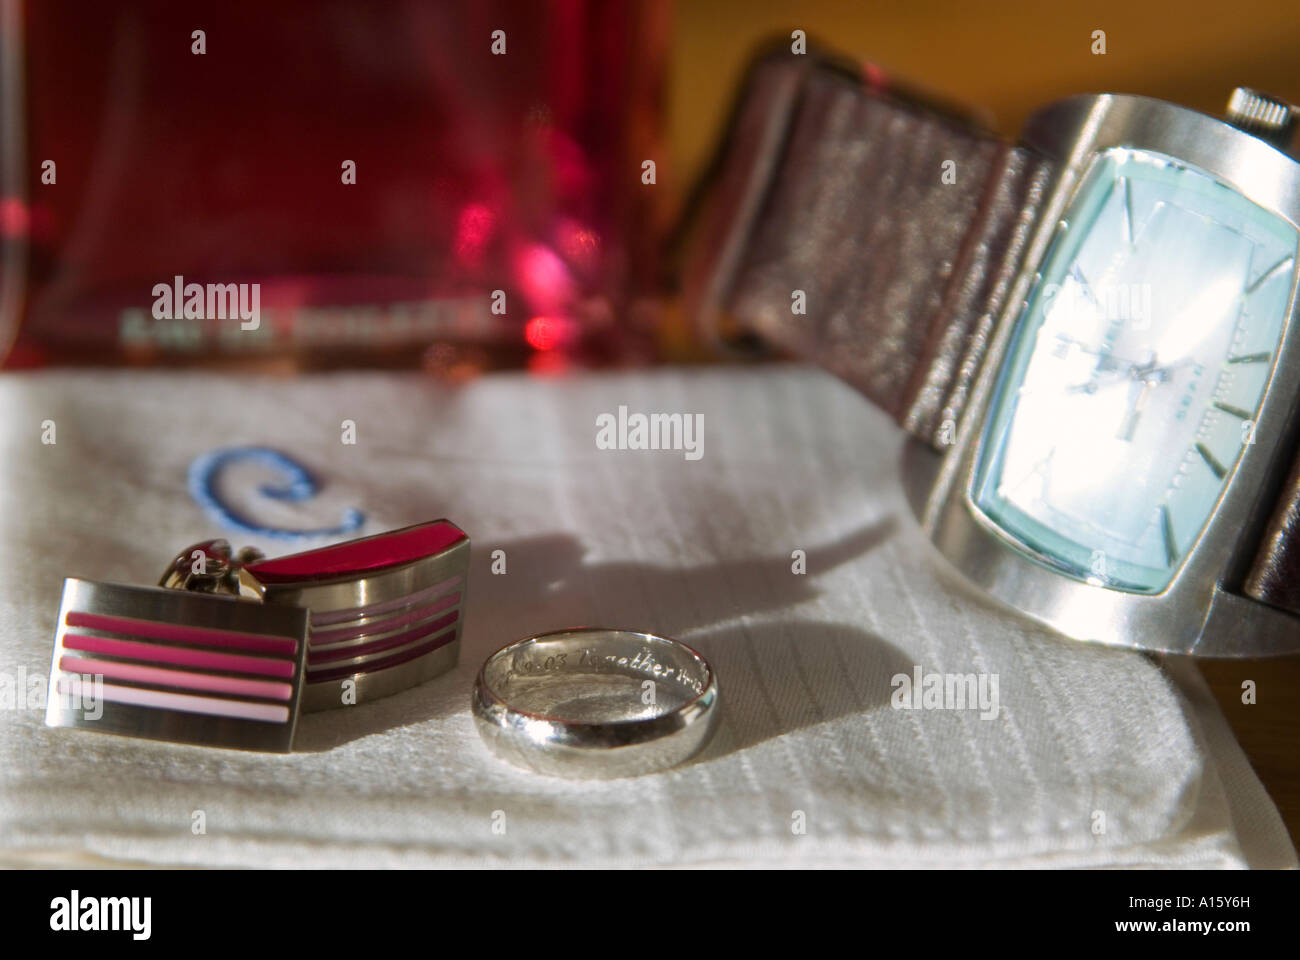 Horizontal close up of a Groom's possessions laid out before his wedding day including his watch, cufflinks and wedding ring. Stock Photo